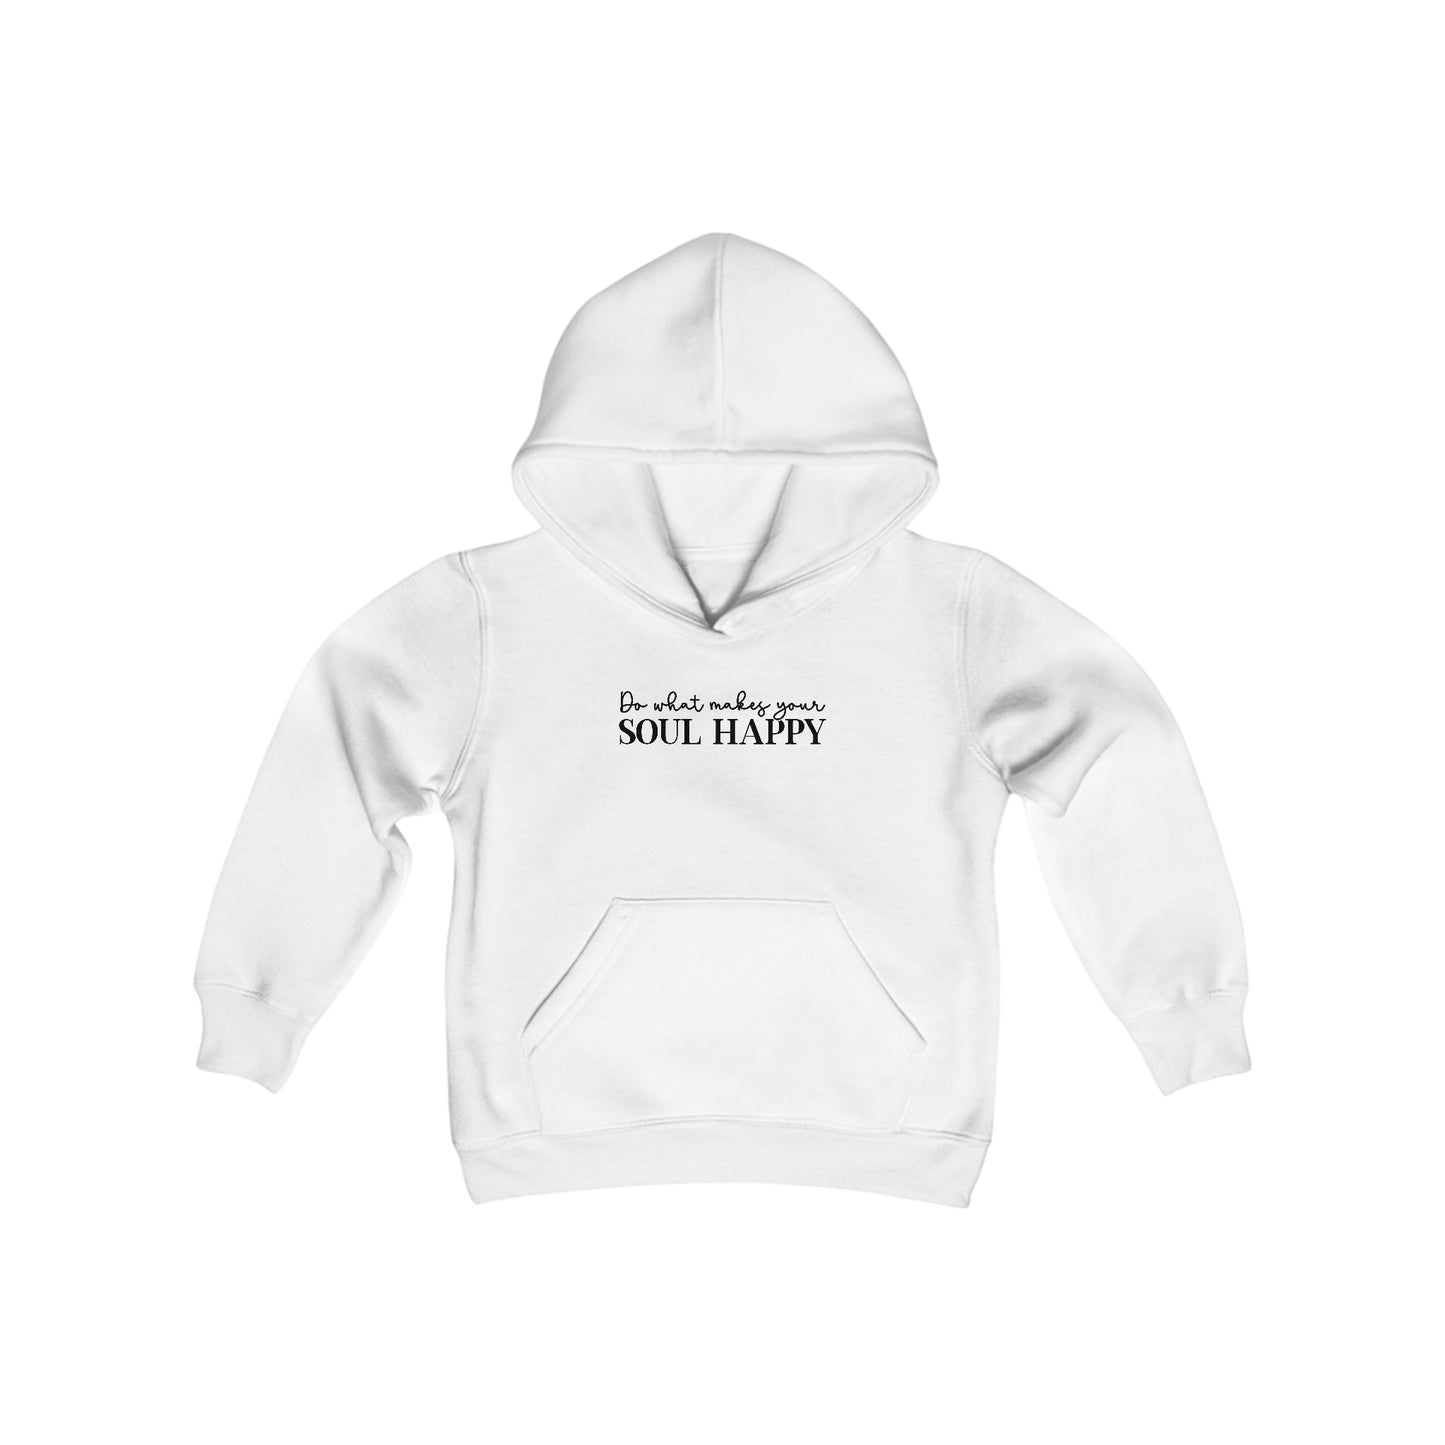 Do What Makes Your Soul Happy - Believe in Yourself - Self Love - Self Acceptance - Inspire - Youth Heavy Blend Hooded Sweatshirt